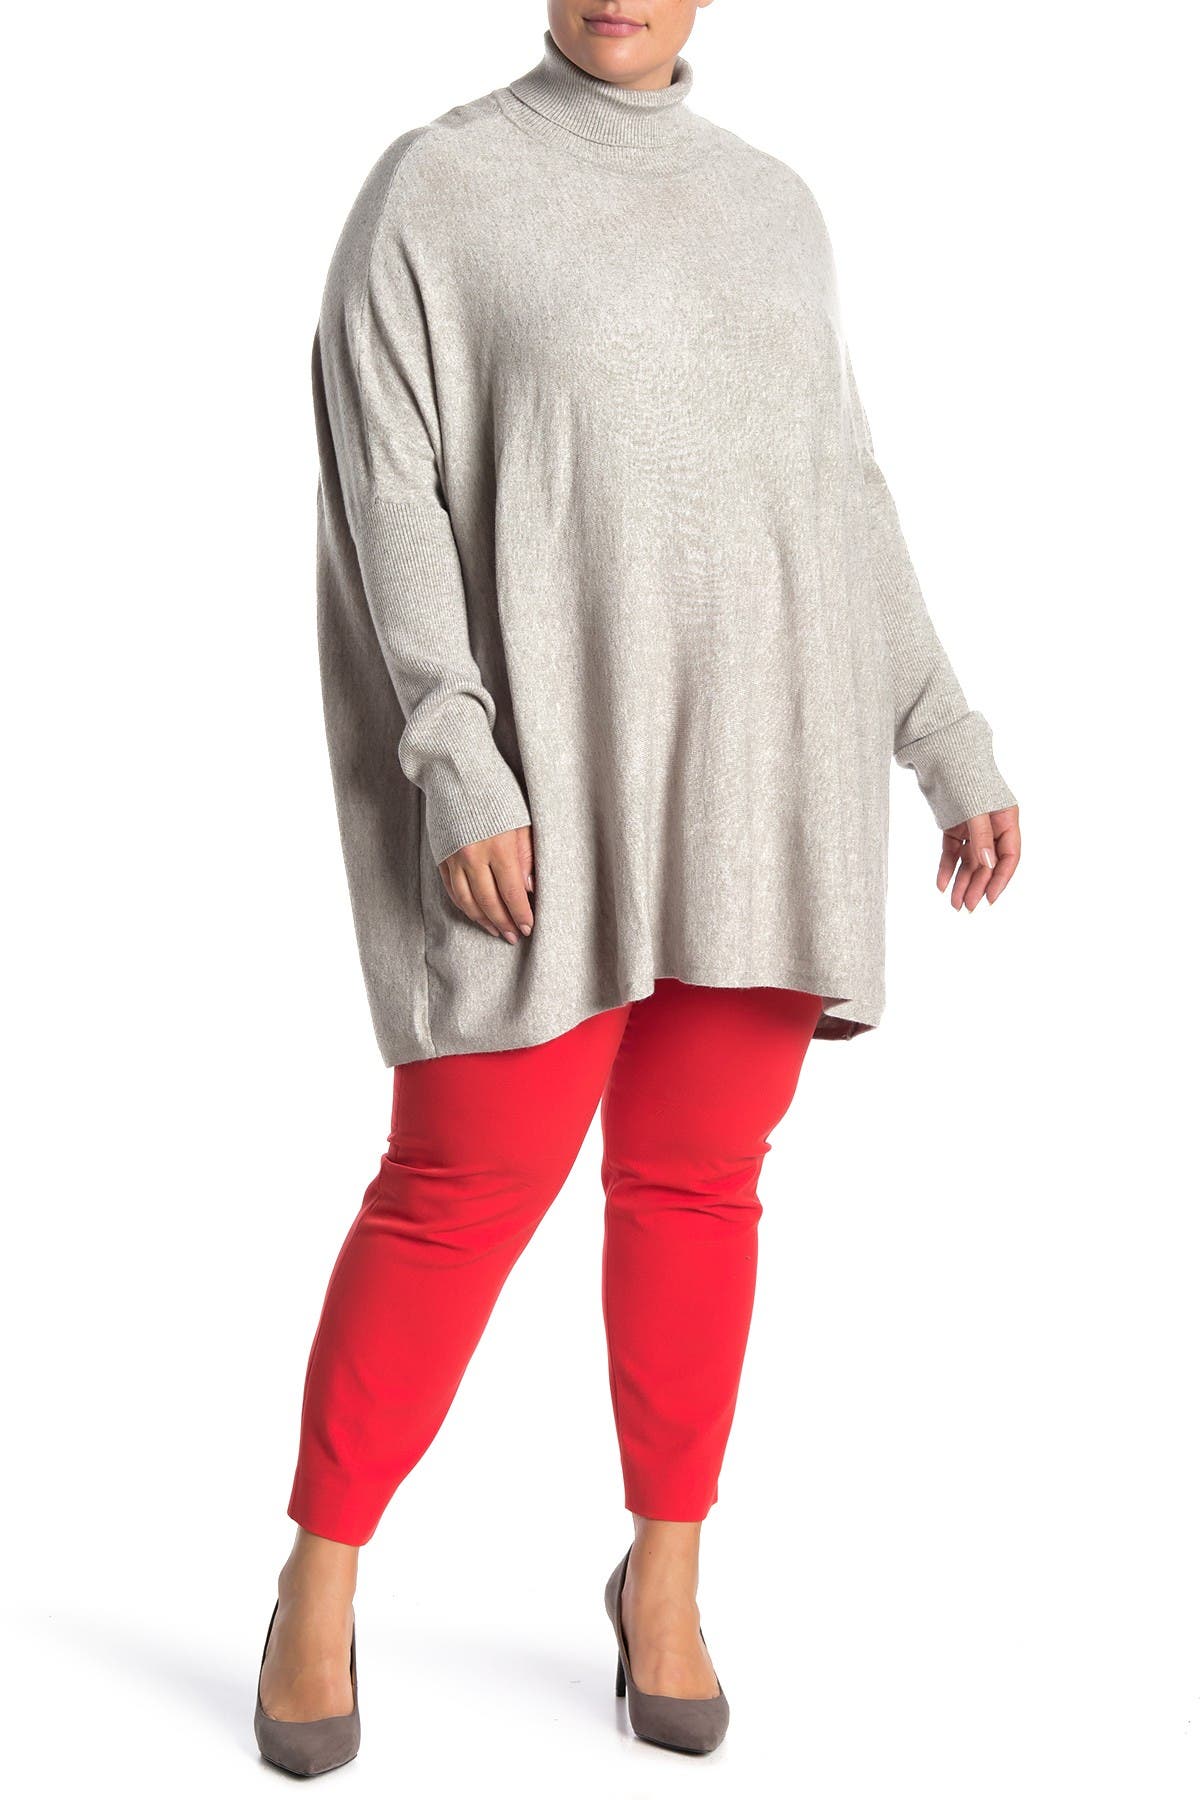 Joseph A Easy Solid Turtleneck Poncho Sweater In Light Heat